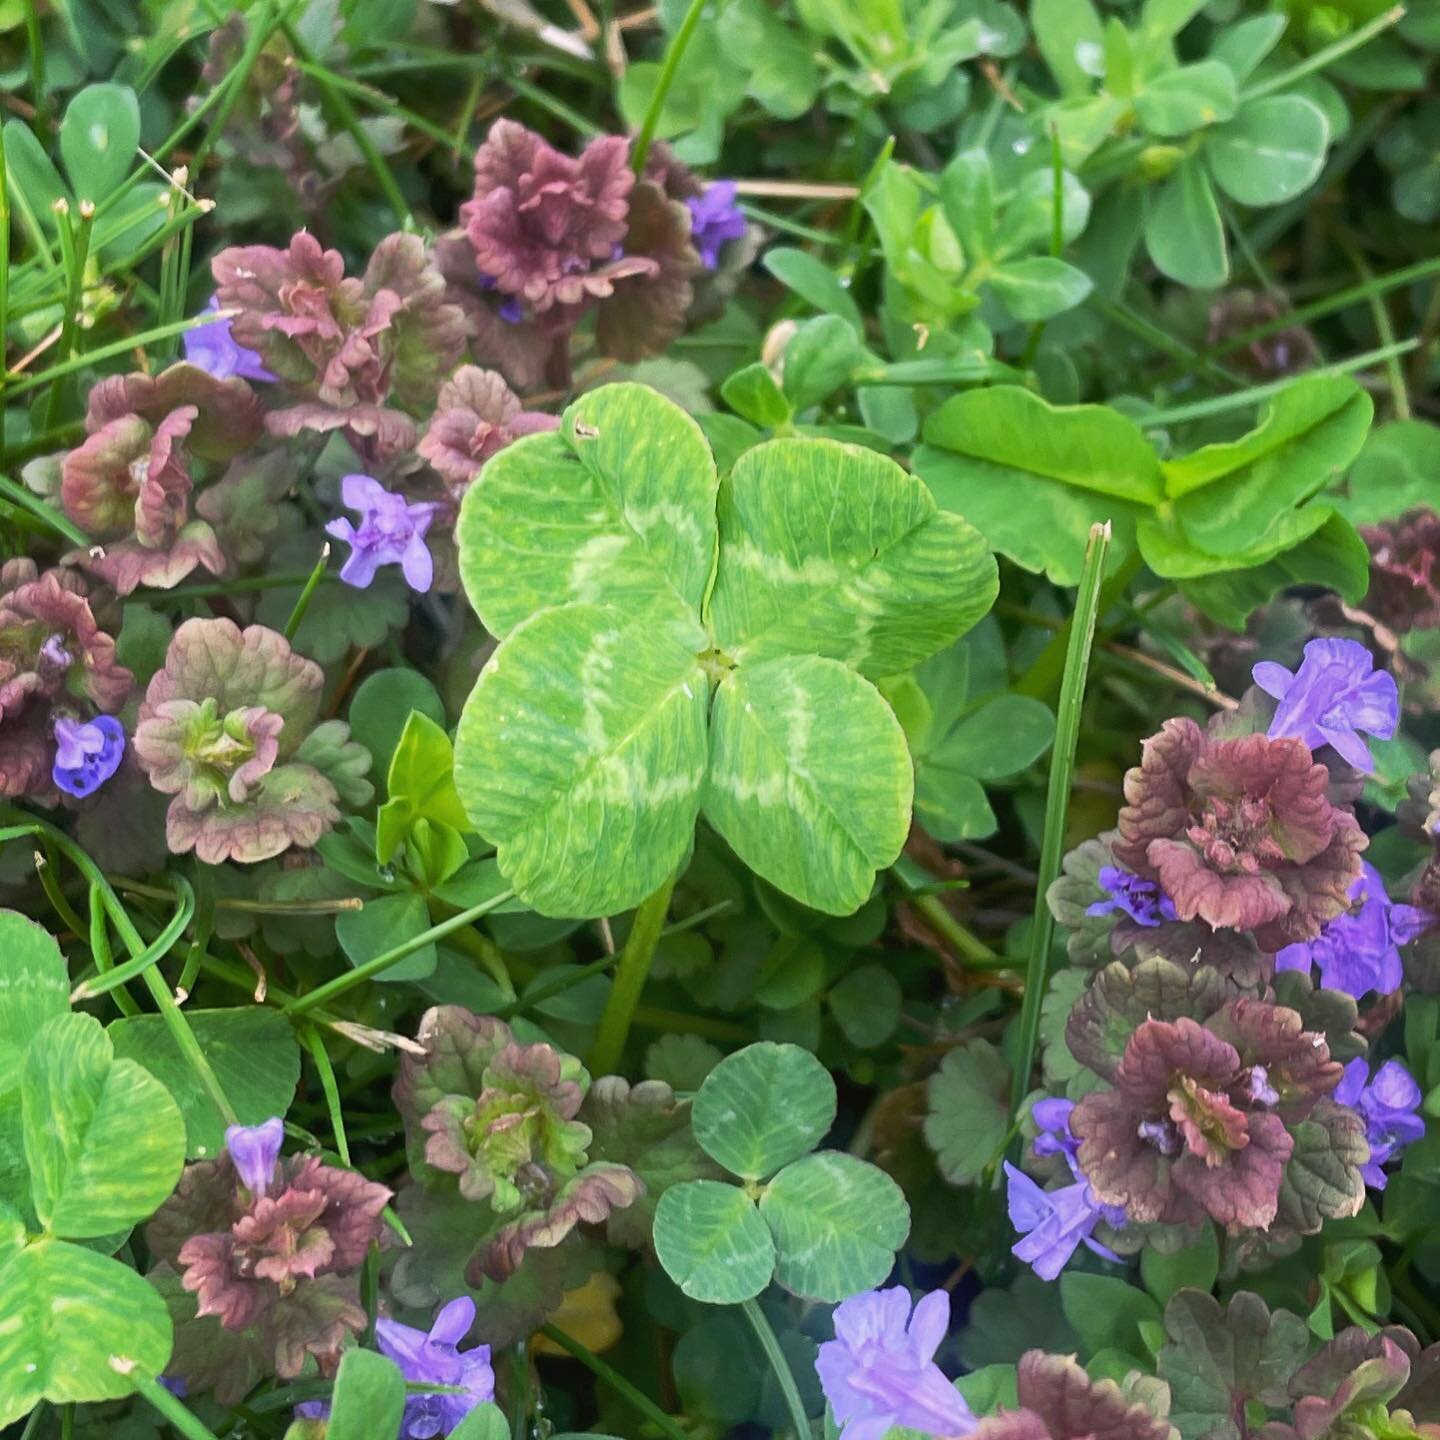 Love when the clovers are among flowers. 💜💚